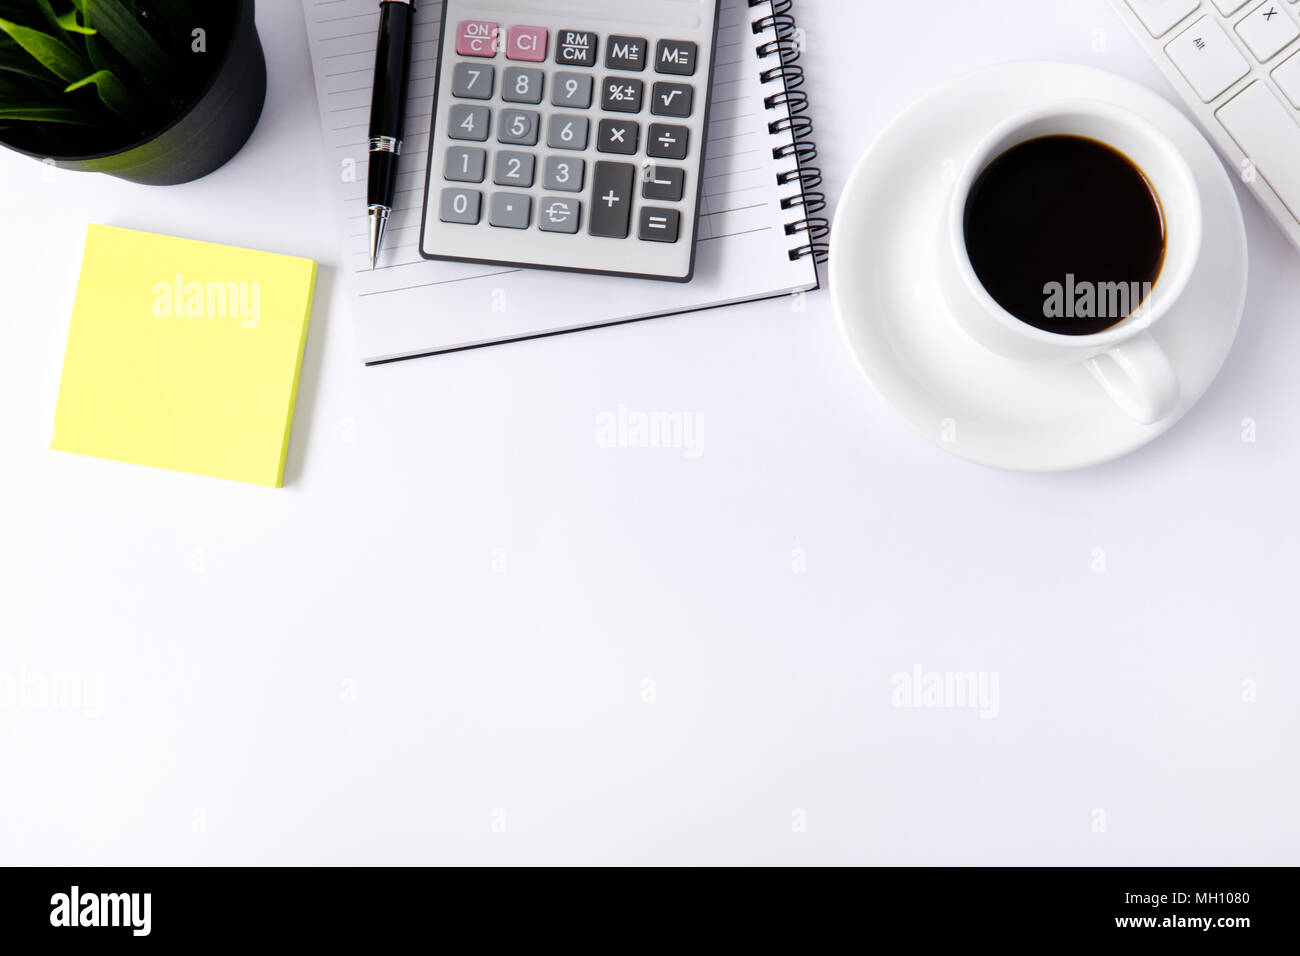 White office desk table with keyboard, notepad, pen, cup of coffee and plant. Stock Photo